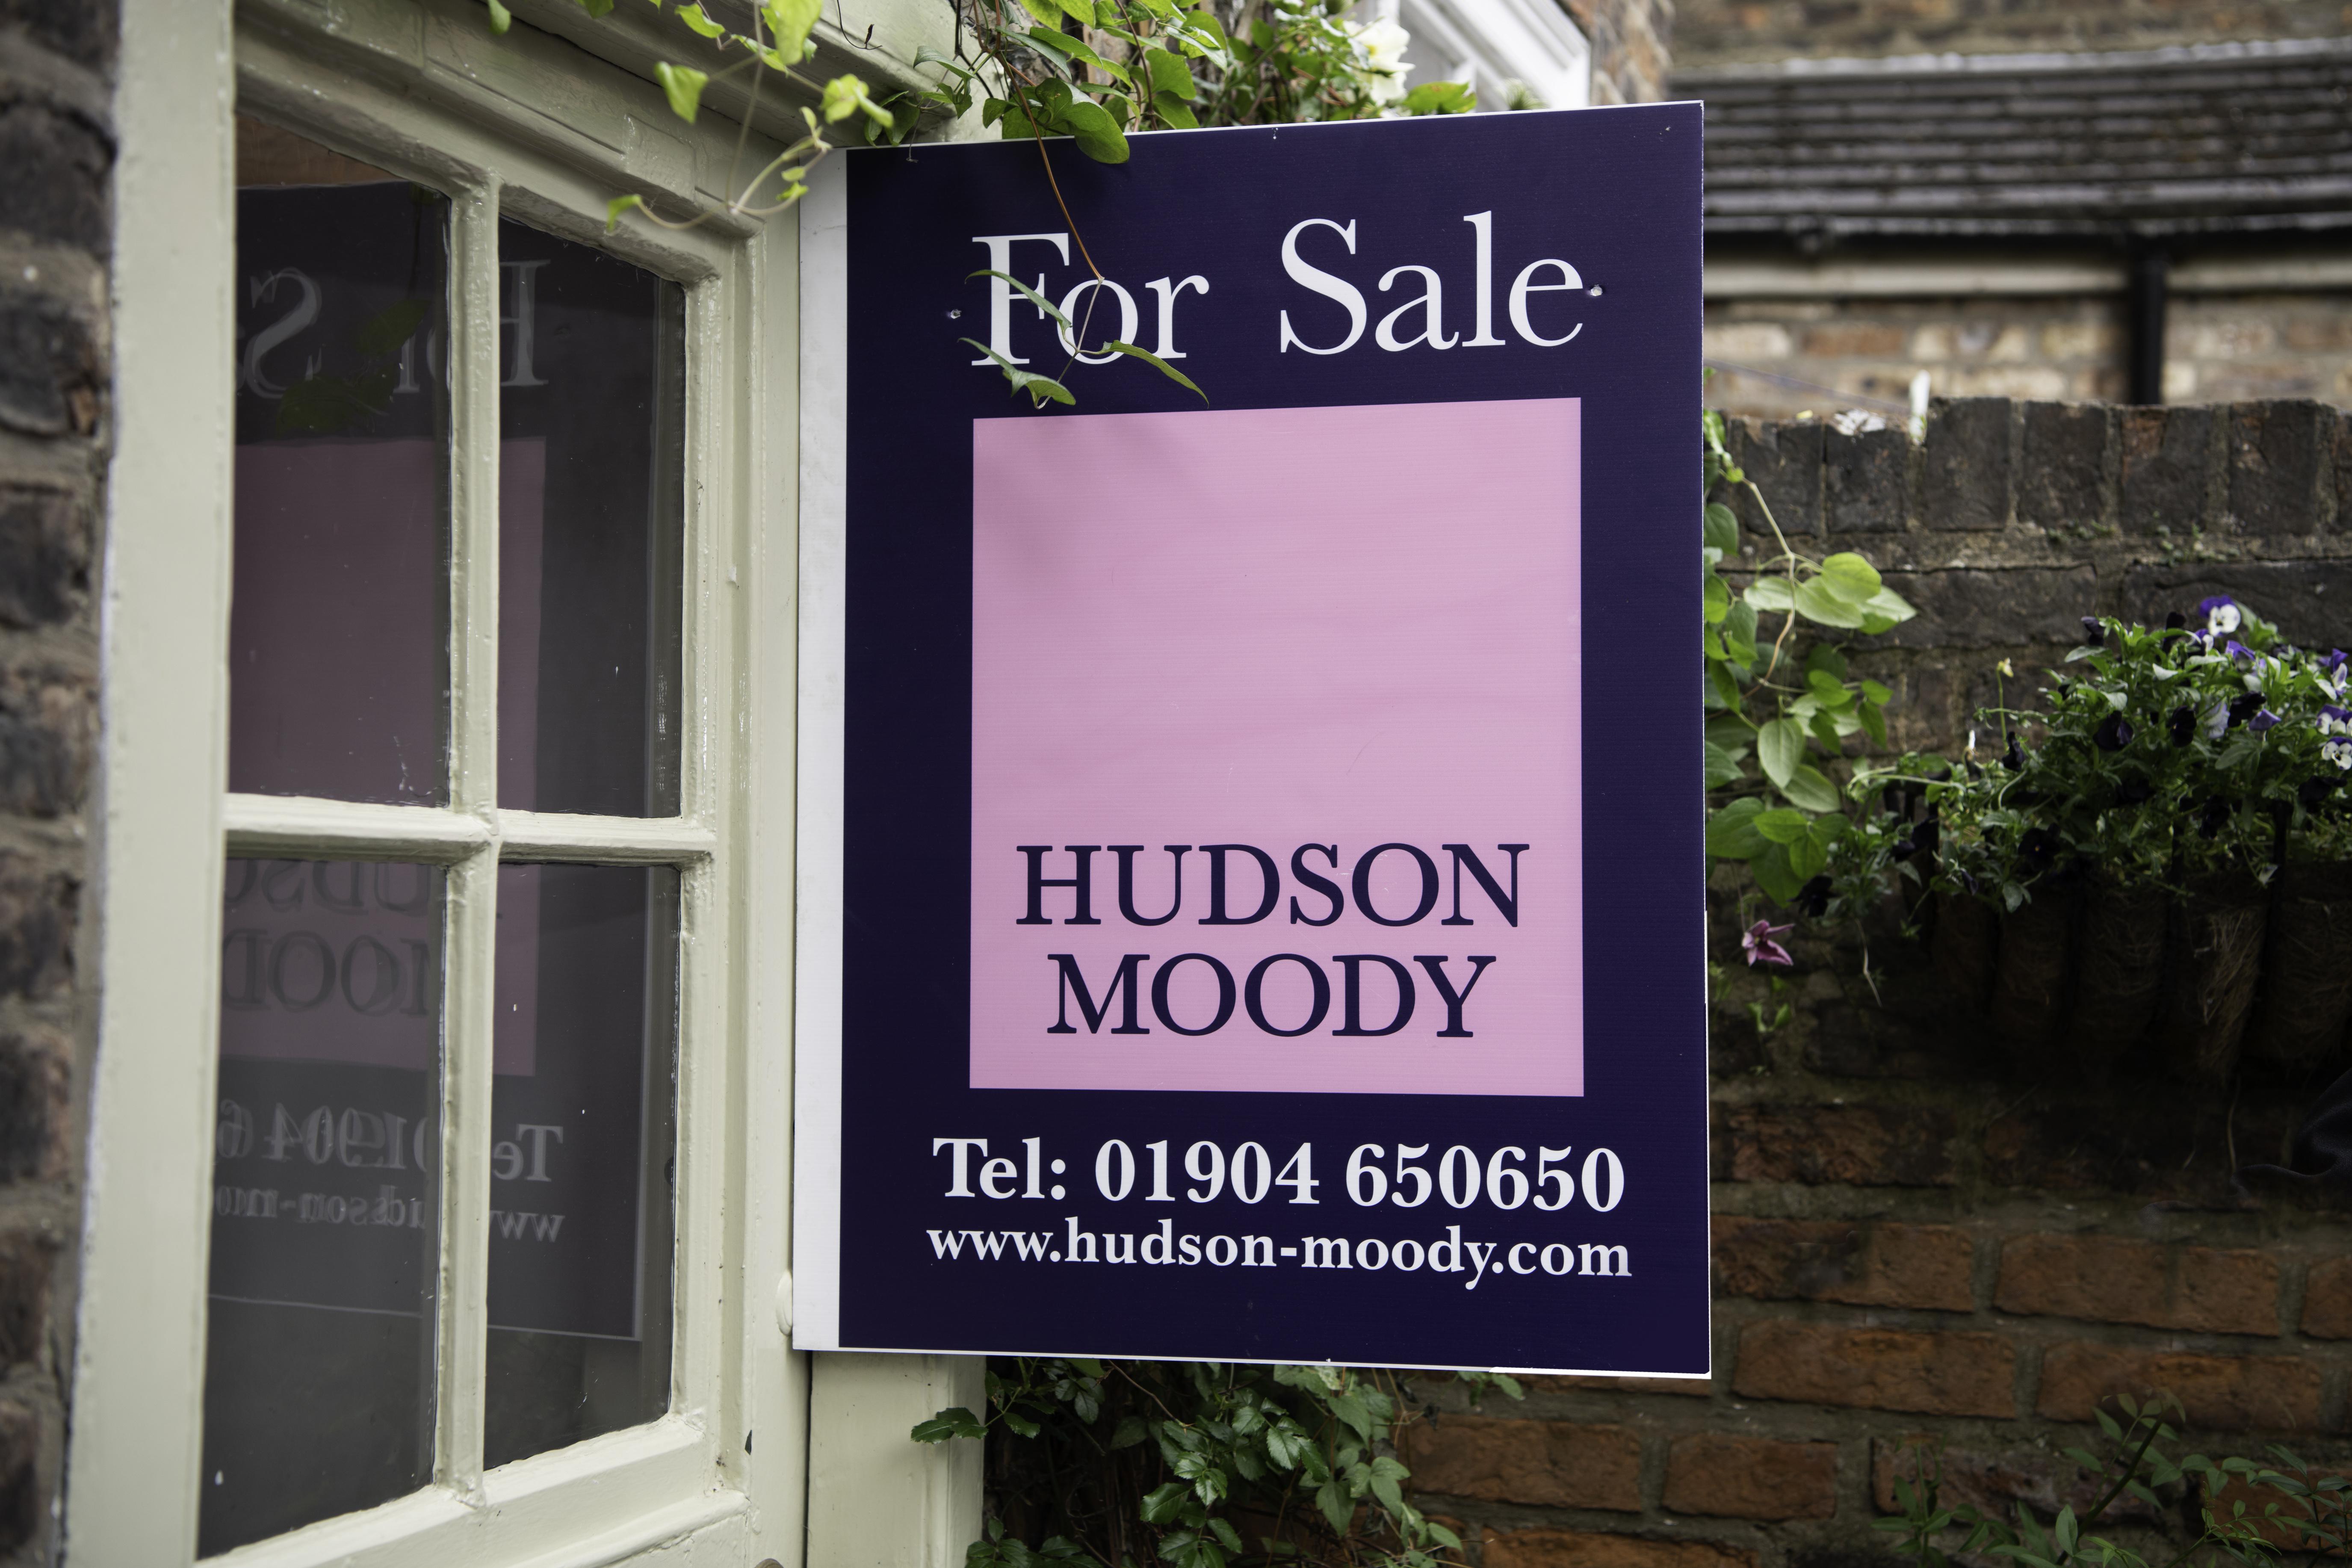 What has been the impact of COVID-19 on Estate Agents Hudson Moody and the property market in York?   